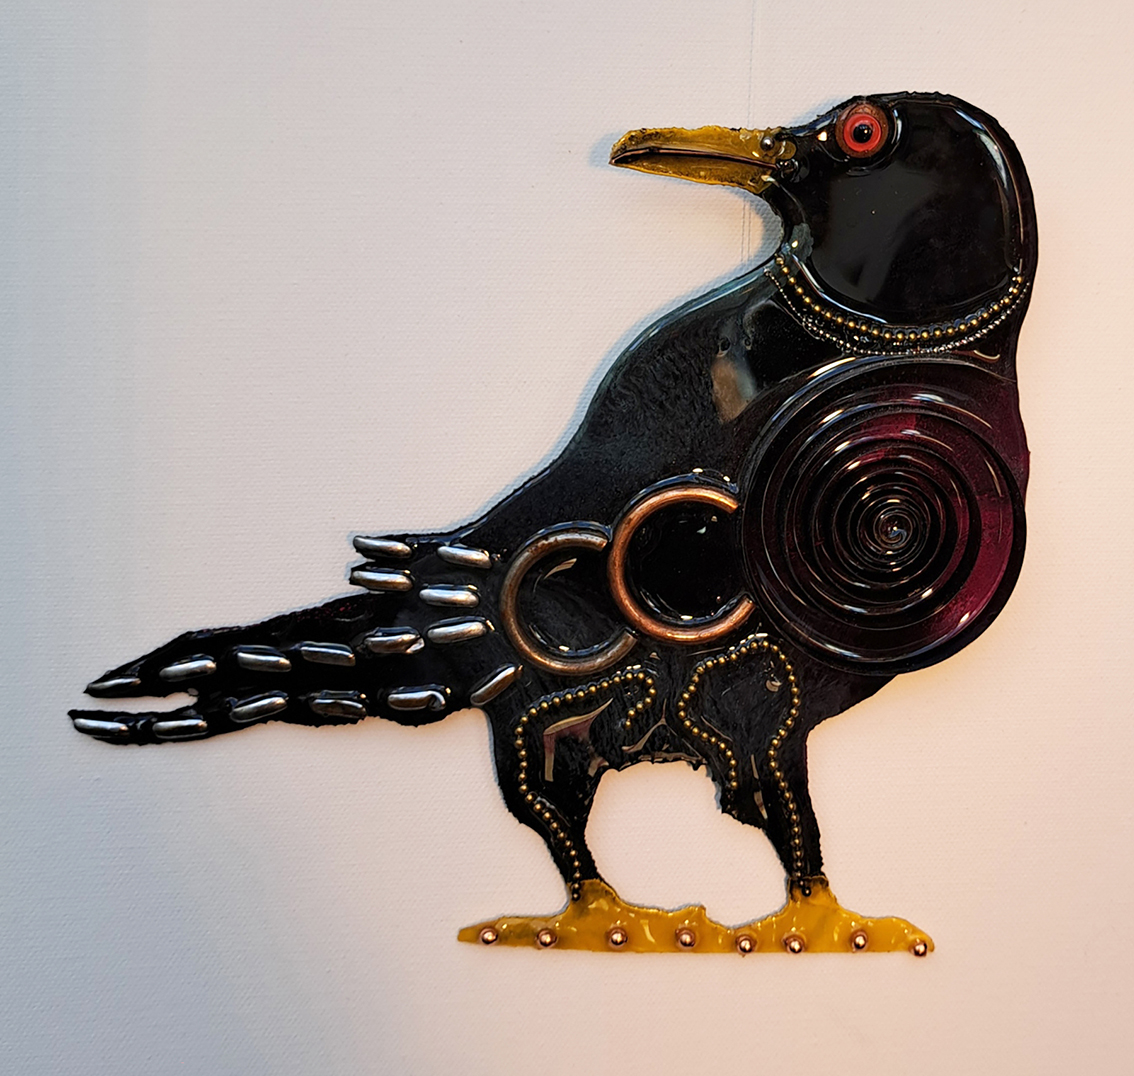 NM Mexico Cancer Center, Gallery With A Cause, Golden Foot Raven 2